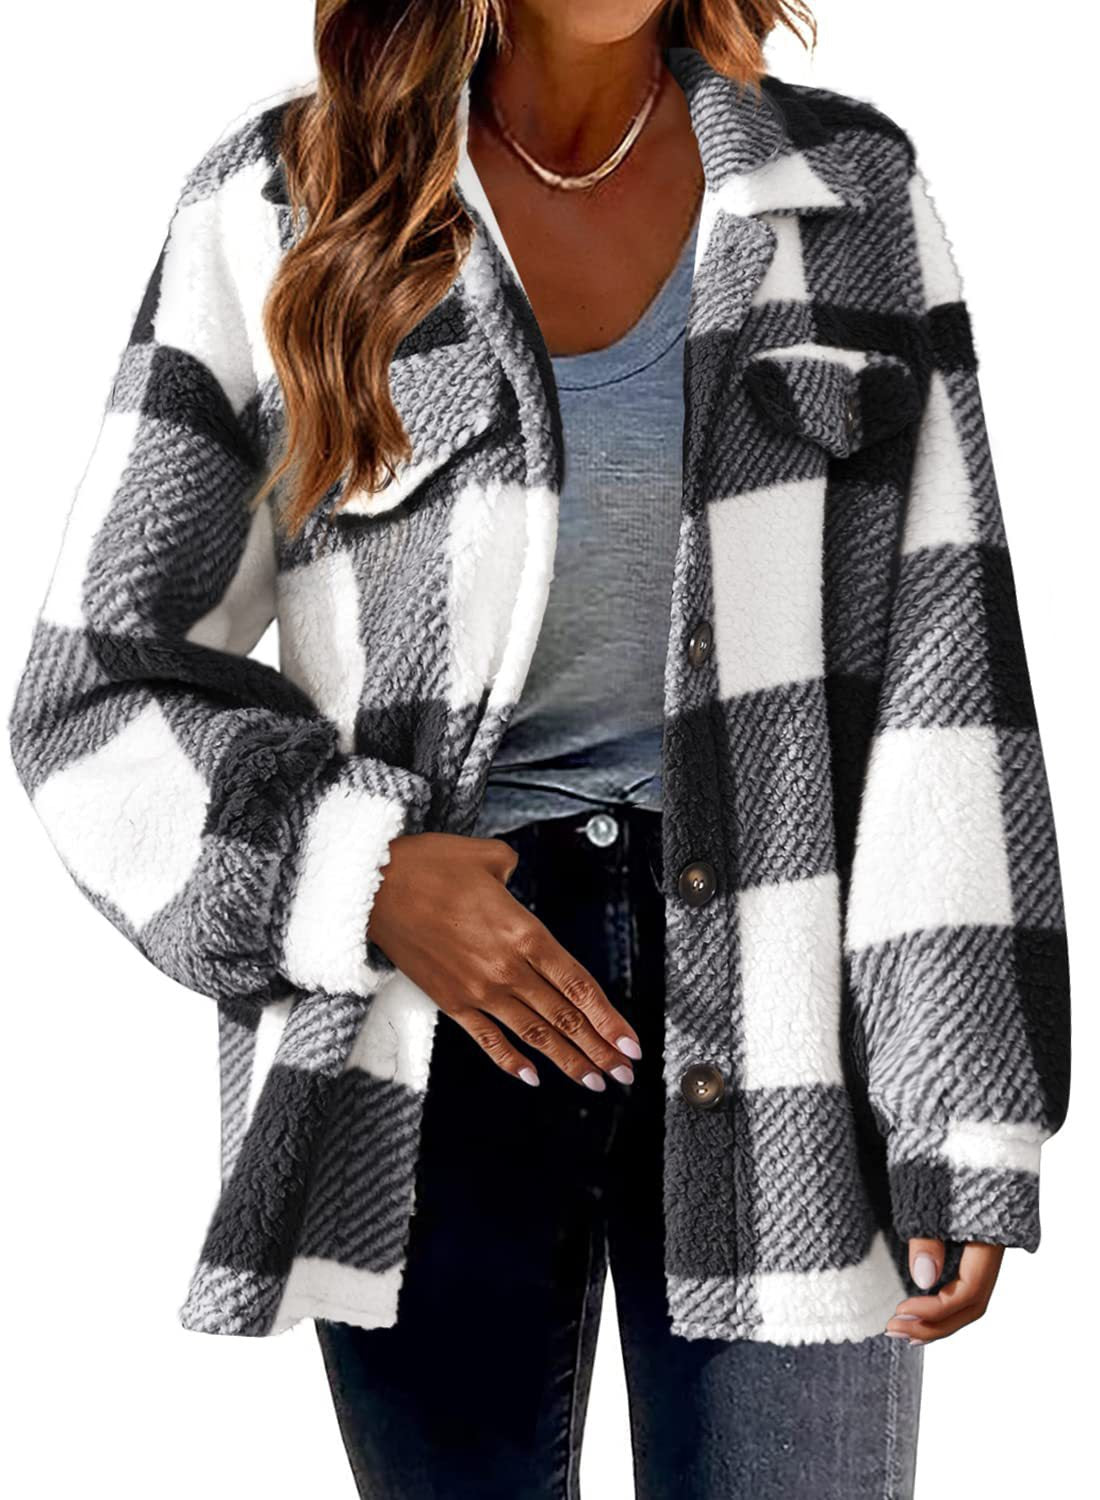 Turndown Collar Plaid Jacket With Pockets Single Breasted Button Down Woolen Jacket Autumn And Winter Clothes For Women